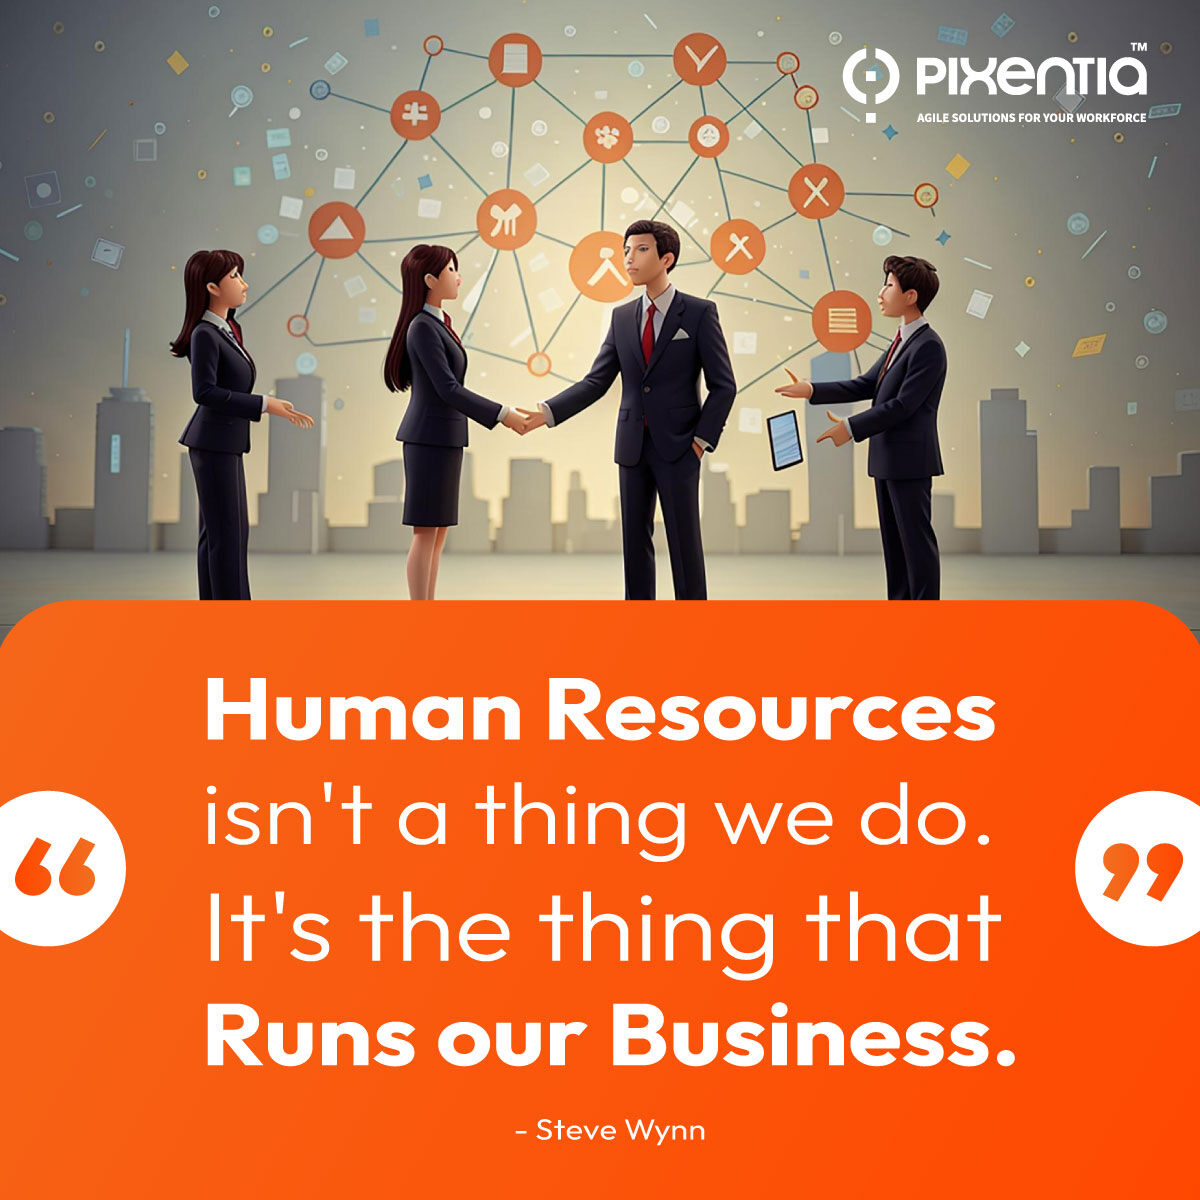 Understanding the importance of #HR in this way can lead to better #employeeengagement, #talentretention, & overall success for the business.
@Pixentia
#HRTech #NowWeDisrupt #WednesdayMotivation #MotivationalWednesday #WednesdayWisdom